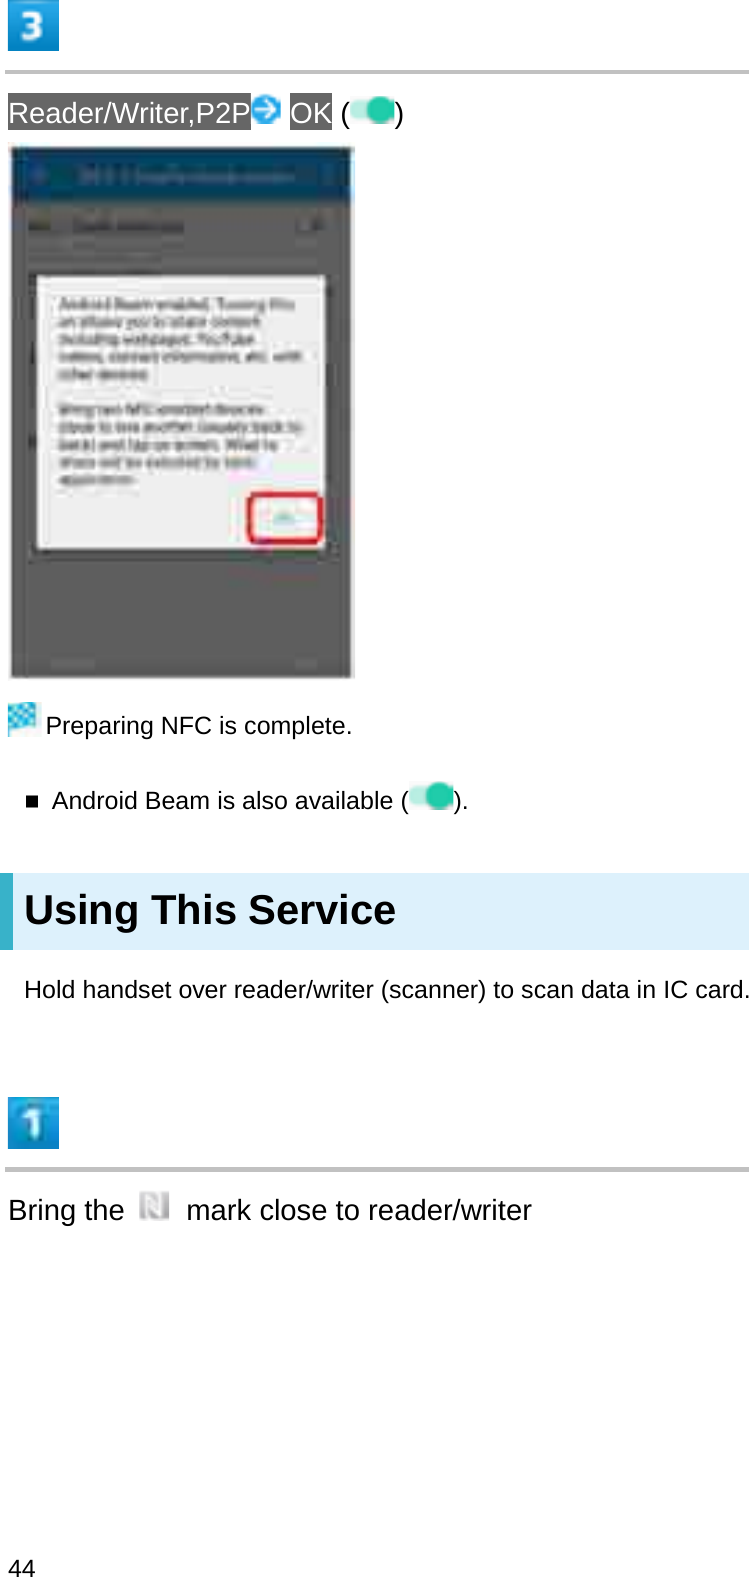 Reader/Writer,P2P OK ( )Preparing NFC is complete.Android Beam is also available ( ).Using This ServiceHold handset over reader/writer (scanner) to scan data in IC card.Bring the  mark close to reader/writer44